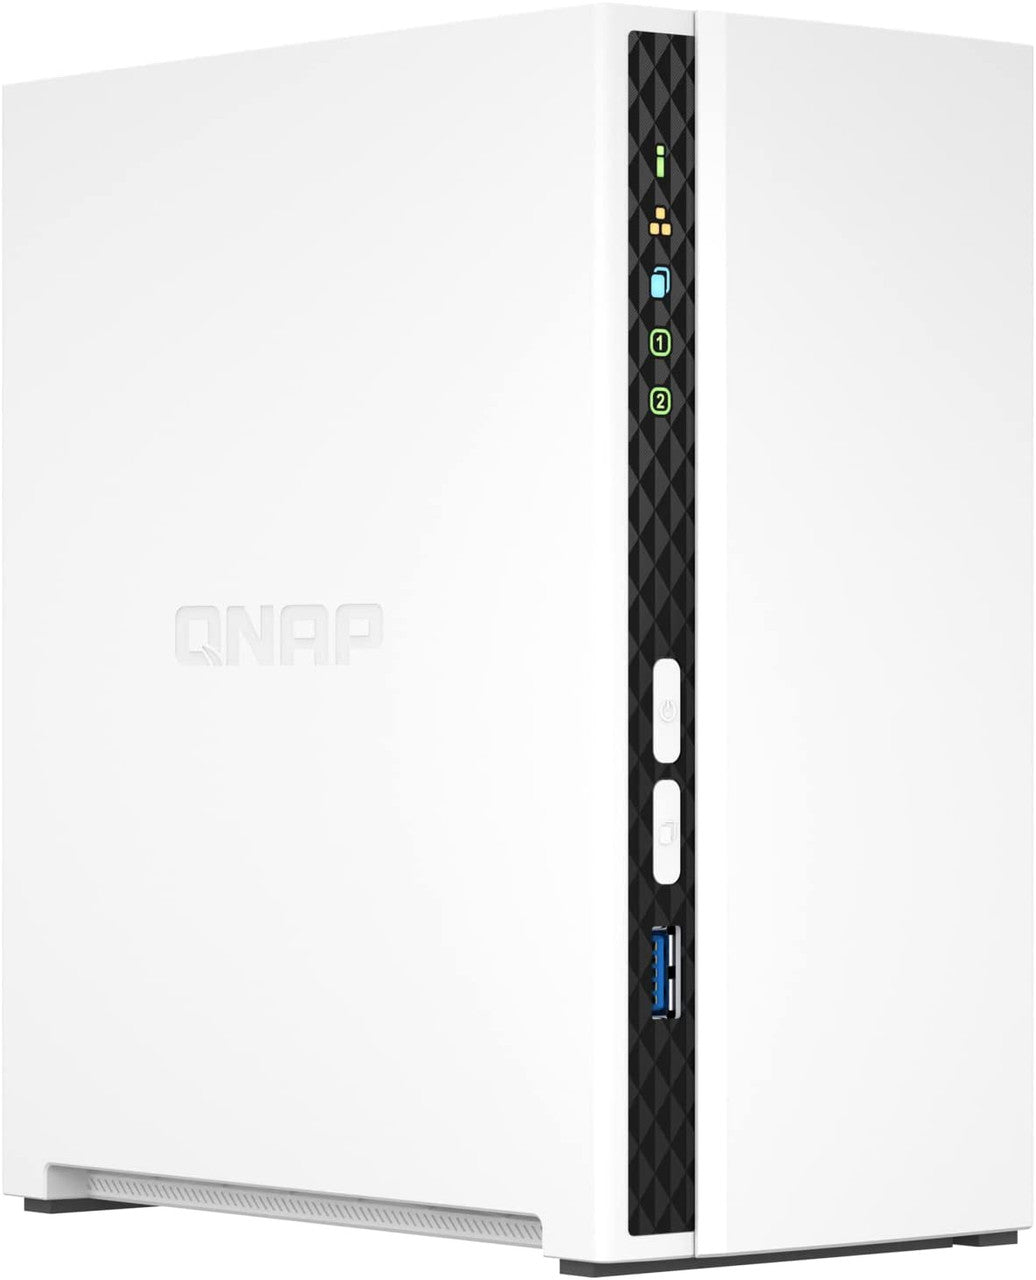 QNAP TS-233 2-Bay Desktop NAS with a 12TB (2 x 6TB) of Seagate Ironwolf NAS Drives Fully Assembled and Tested